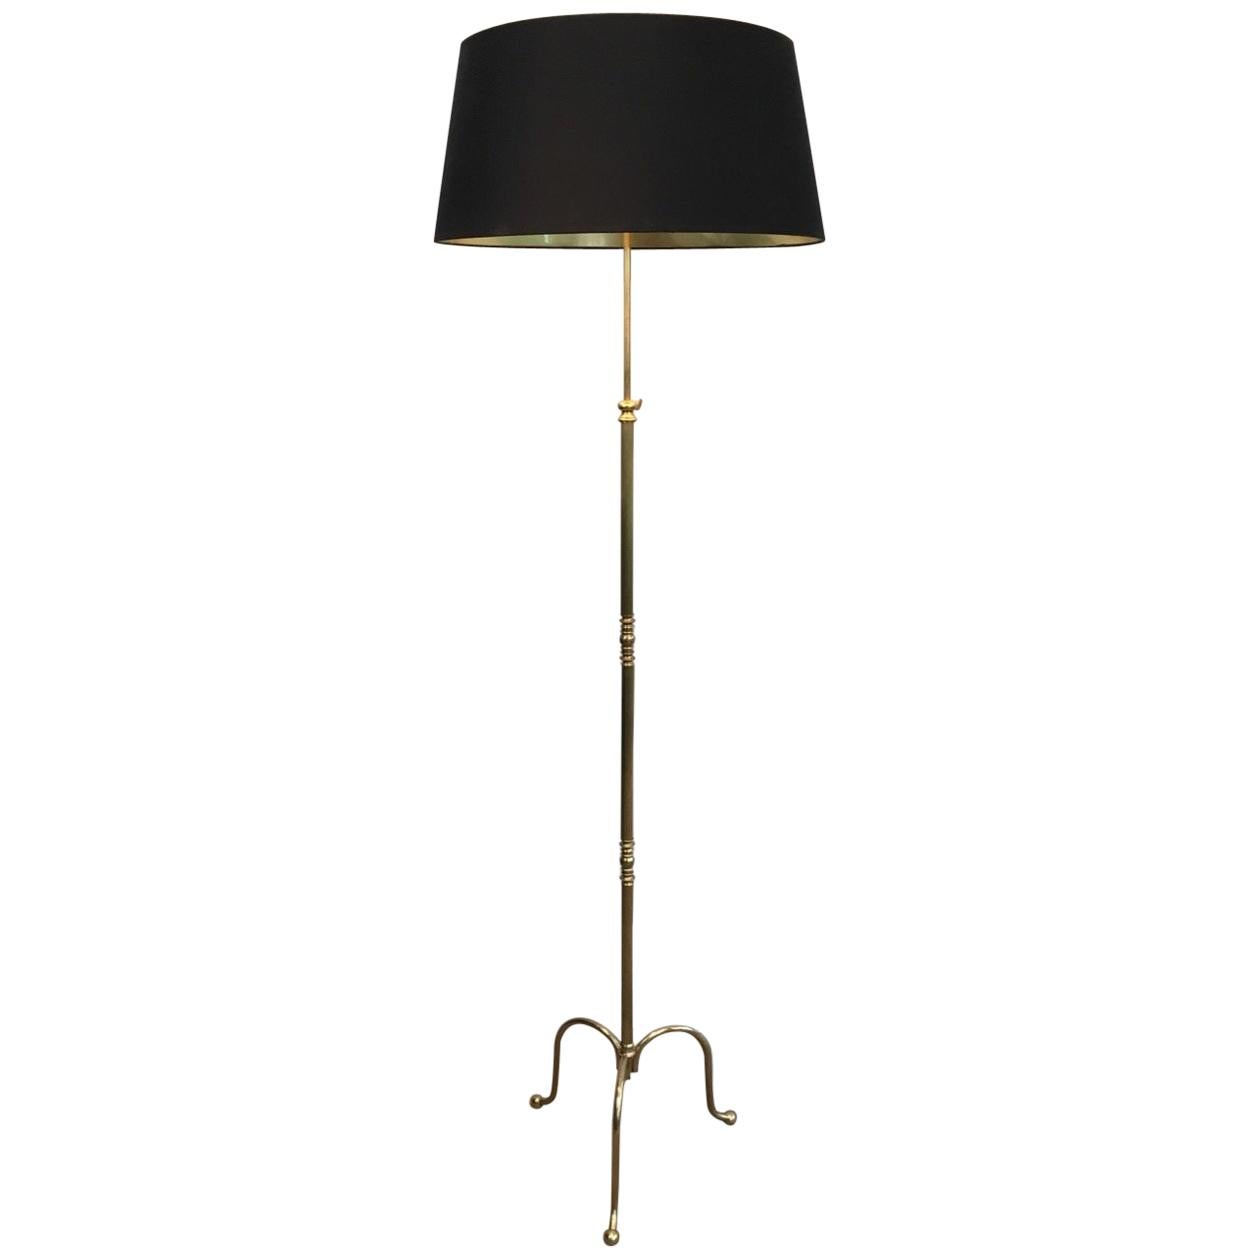 Neoclassical Adjustable Brass Floor Lamp with Black Shade Gold Inside, French